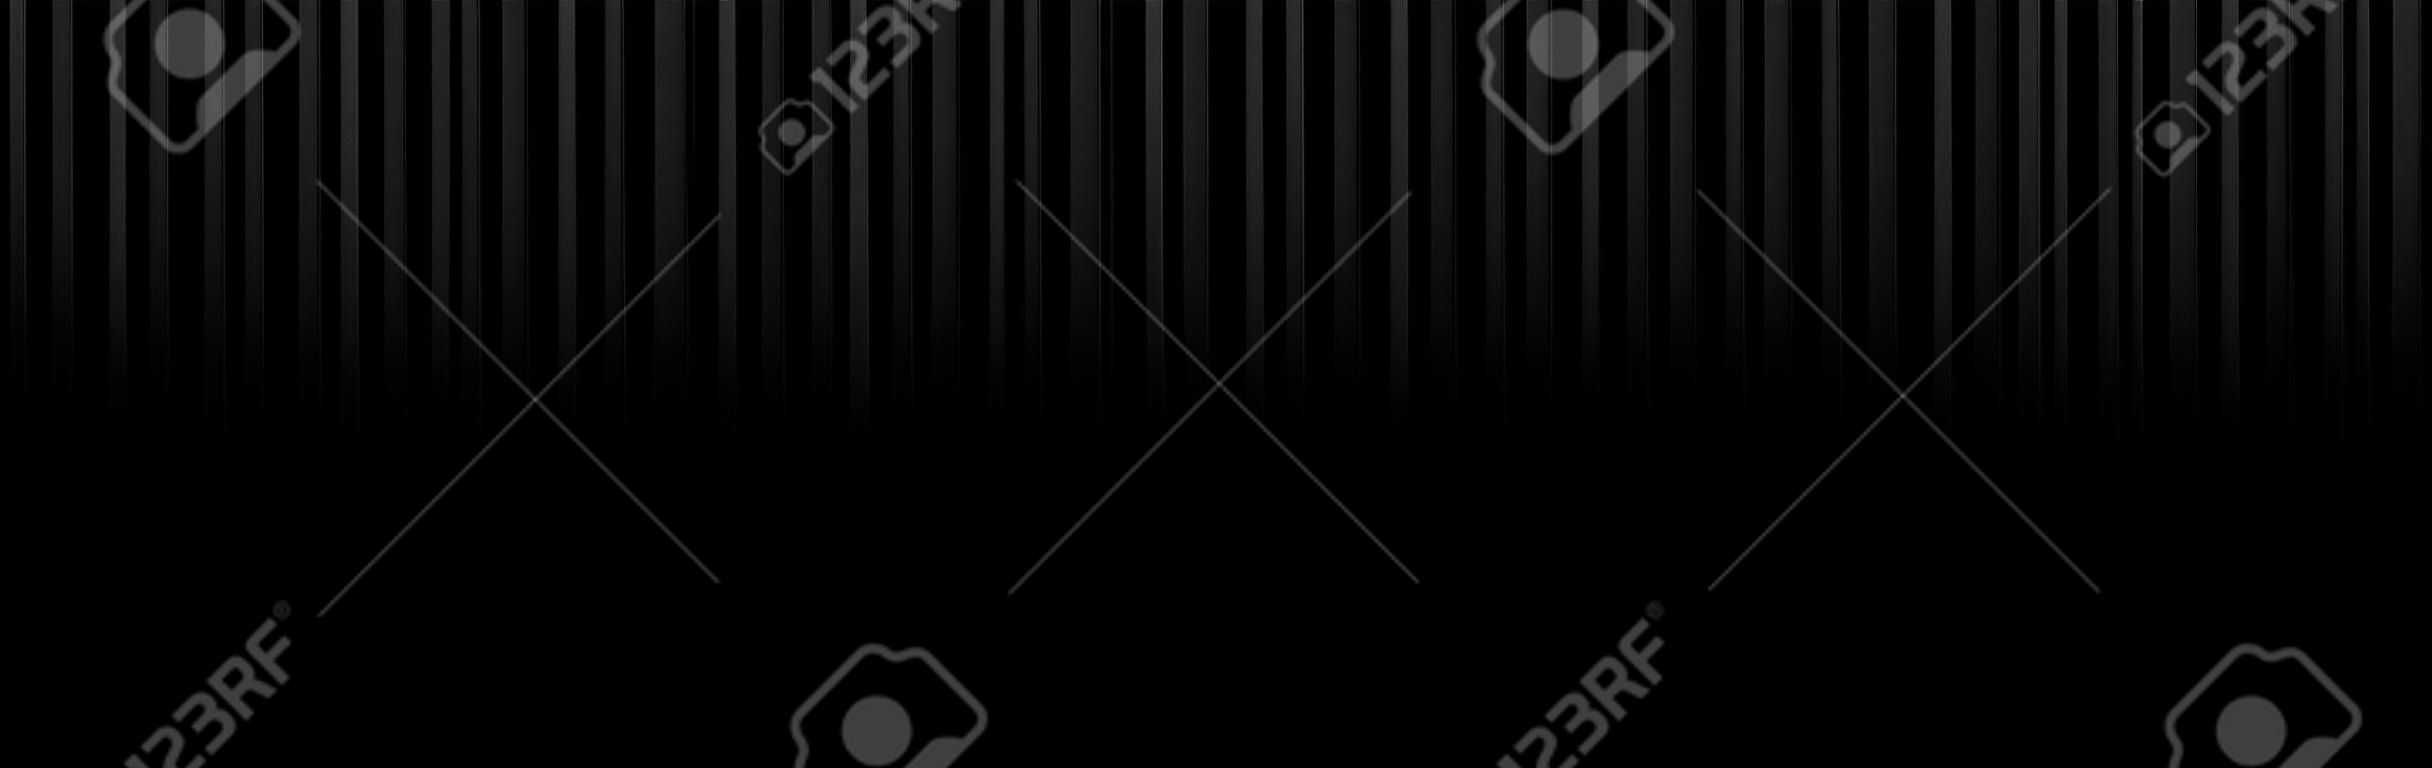 black lighting background with vertical stripes. Vector abstract background